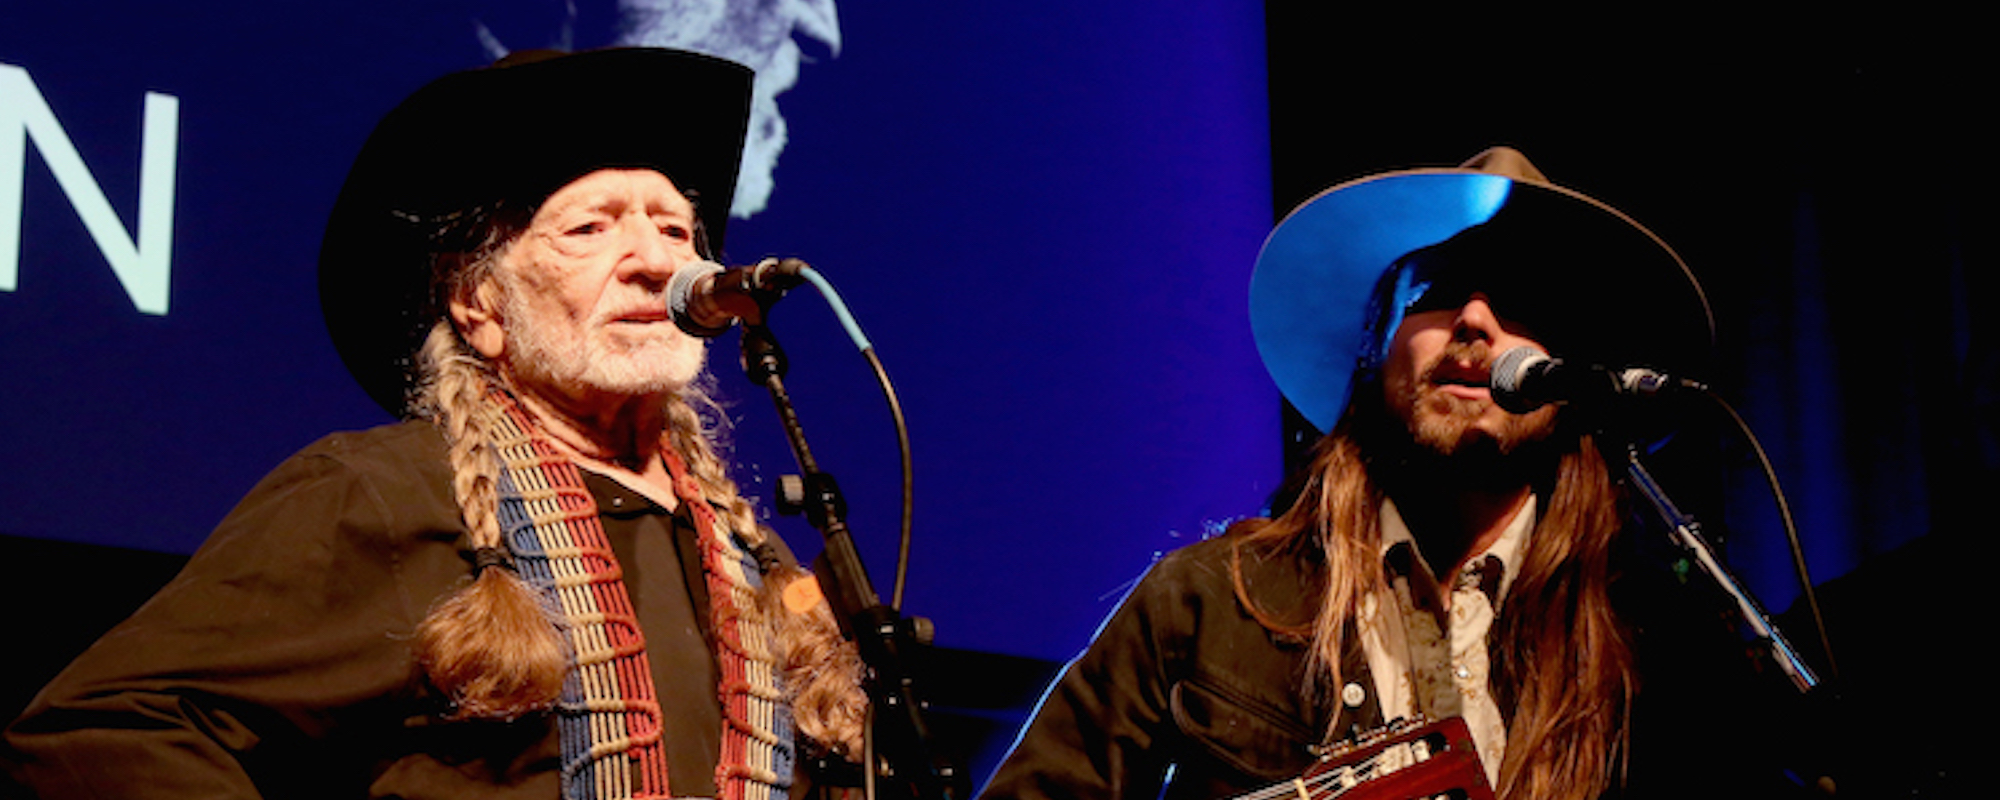 From Farm Aid to a Pearl Jam Cover: 3 Memorable Performances and Collaborations by Willie Nelson and Son Lukas Nelson